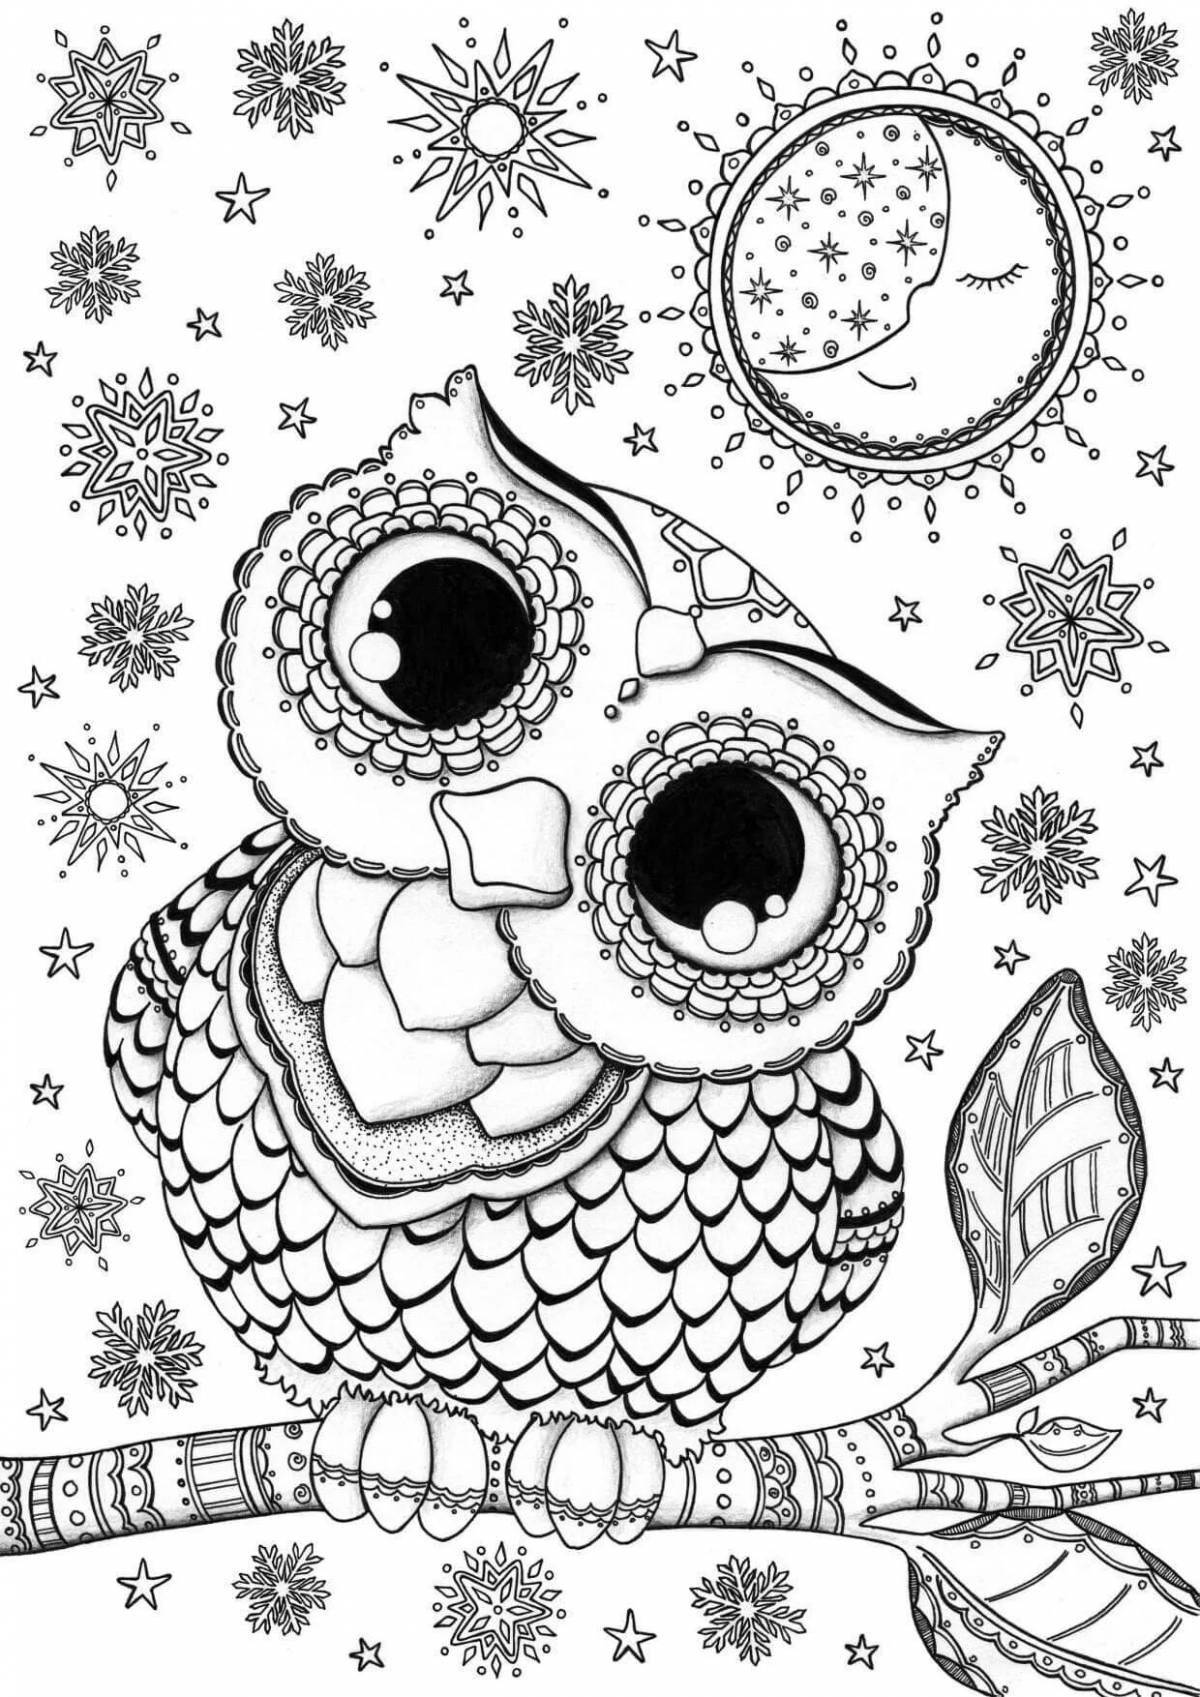 Exciting cute coloring book